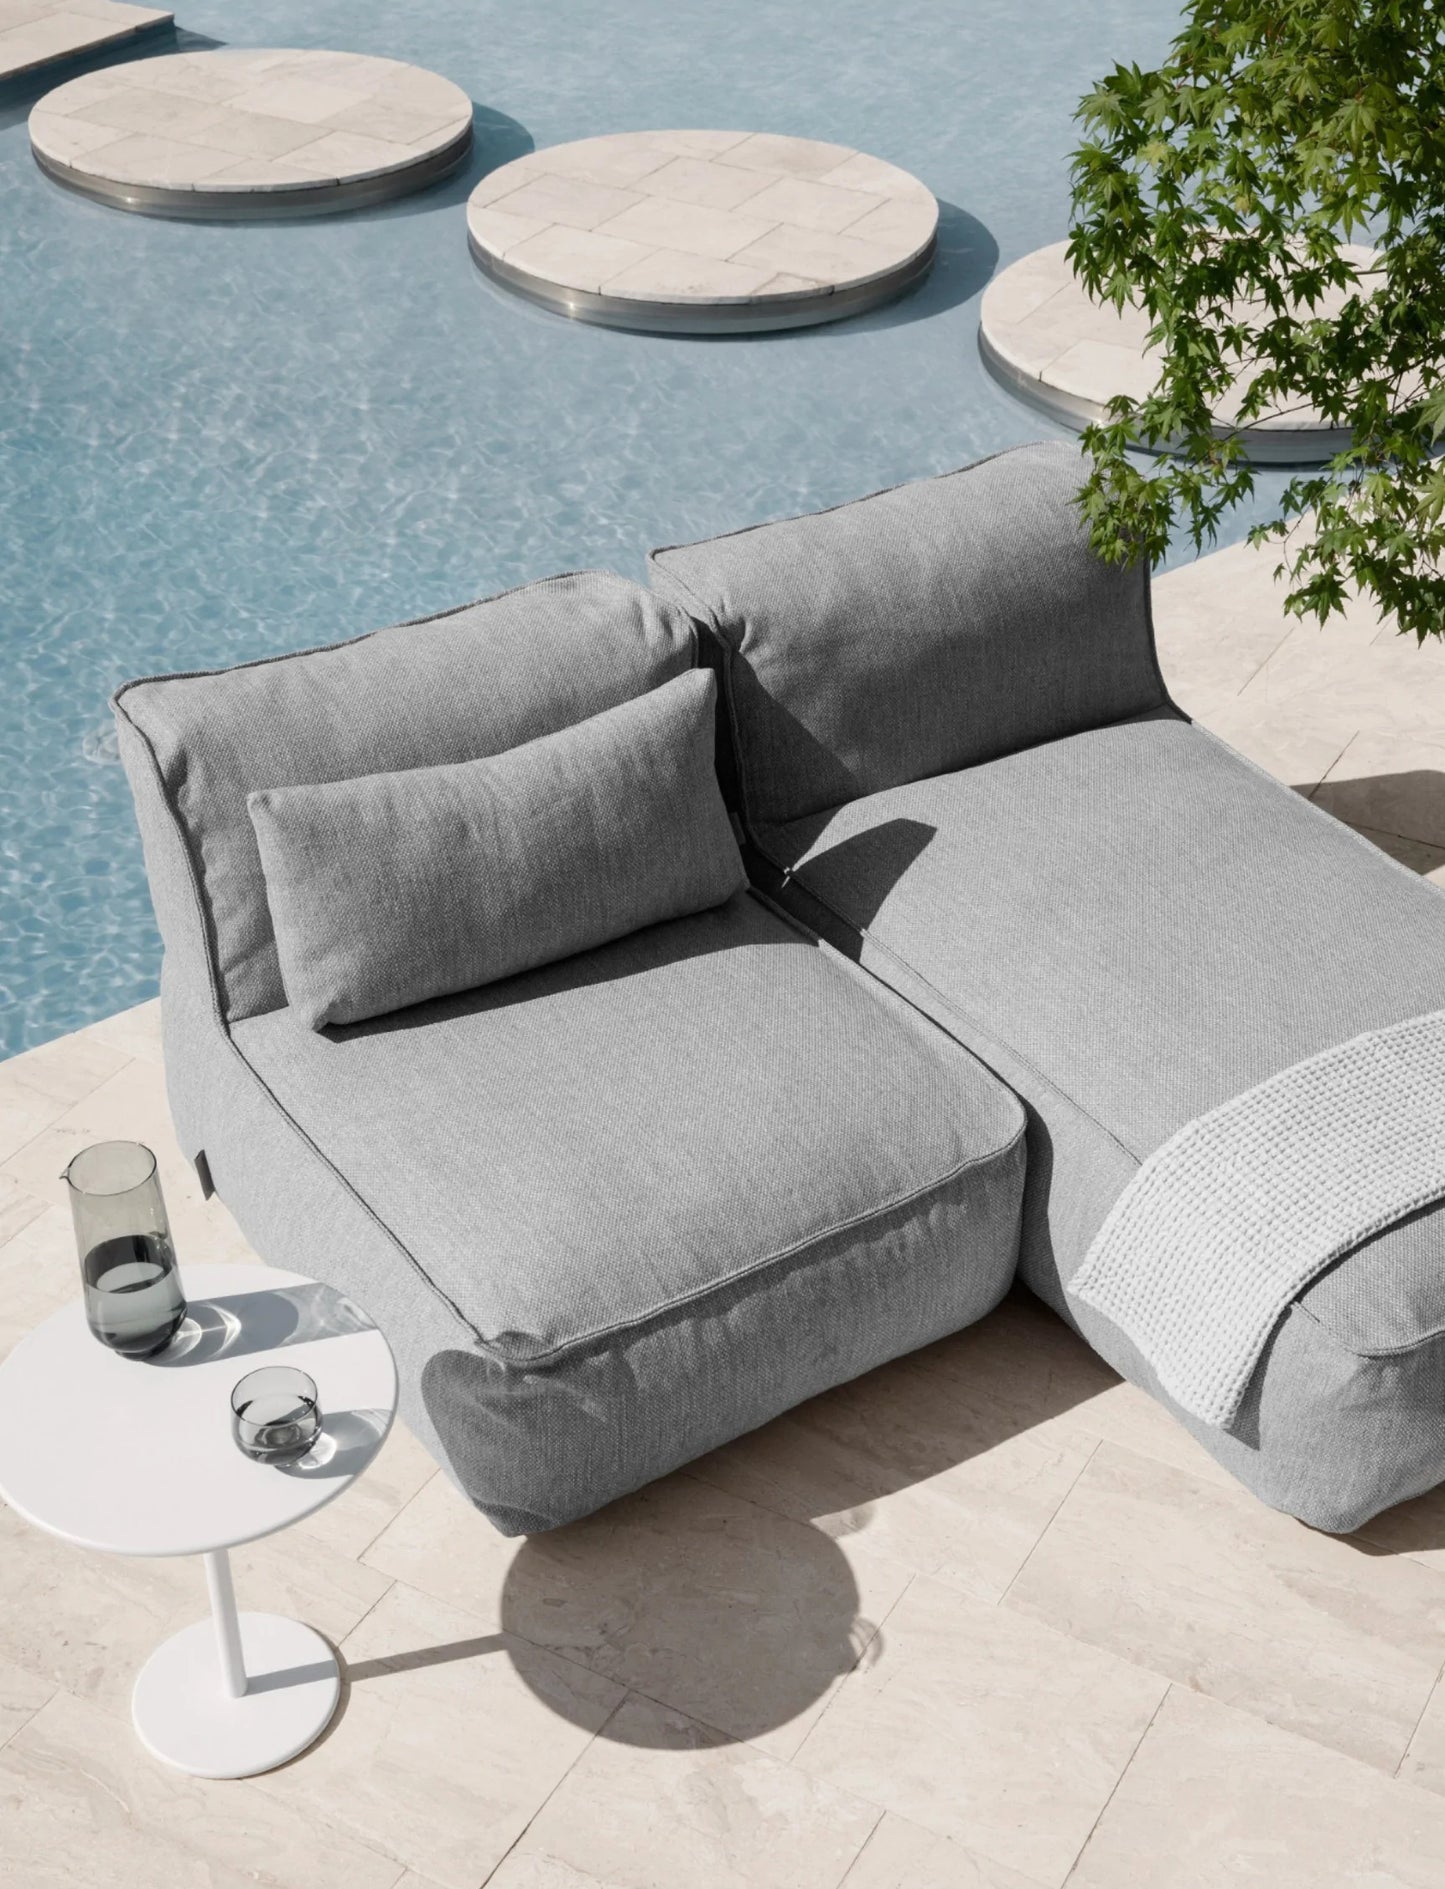 Blomus Grow Single Chaise Sectional Outdoor Patio Lounger Coal 62073